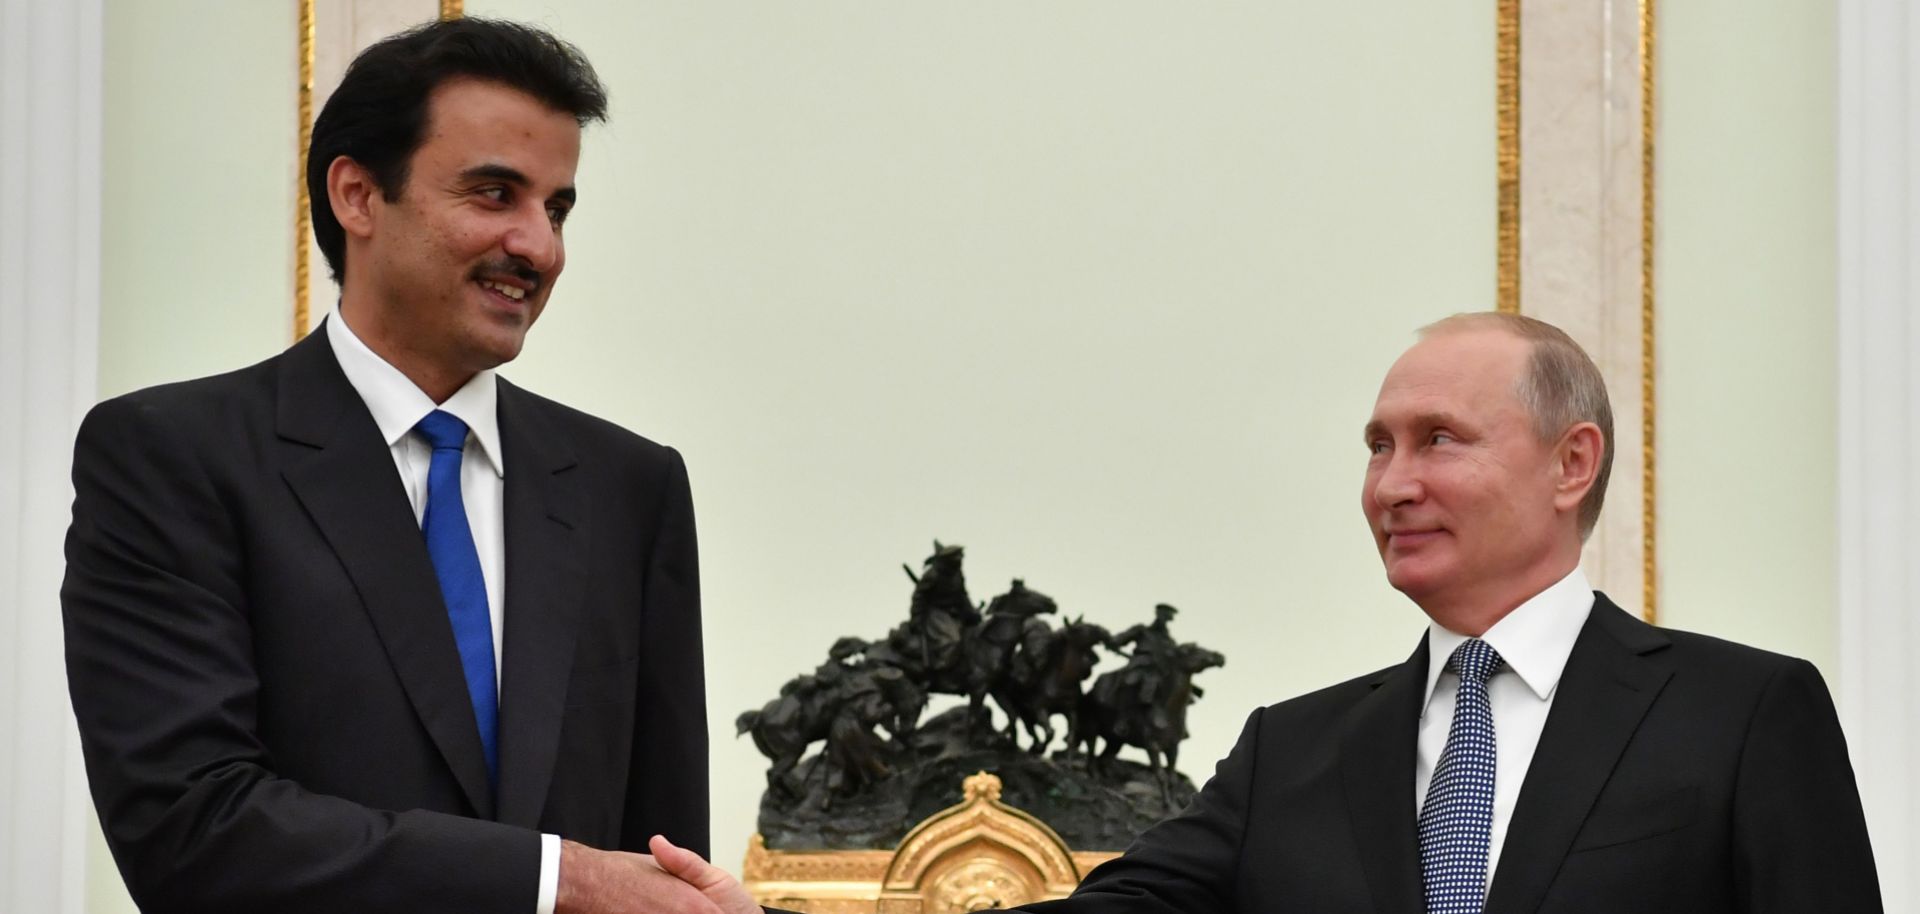 Emir of Qatar Sheikh Tamim bin Hamad Al-Thani (L) shakes hands with Russian President Vladimir Putin during their meeting at the Kremlin in Moscow on July 15.